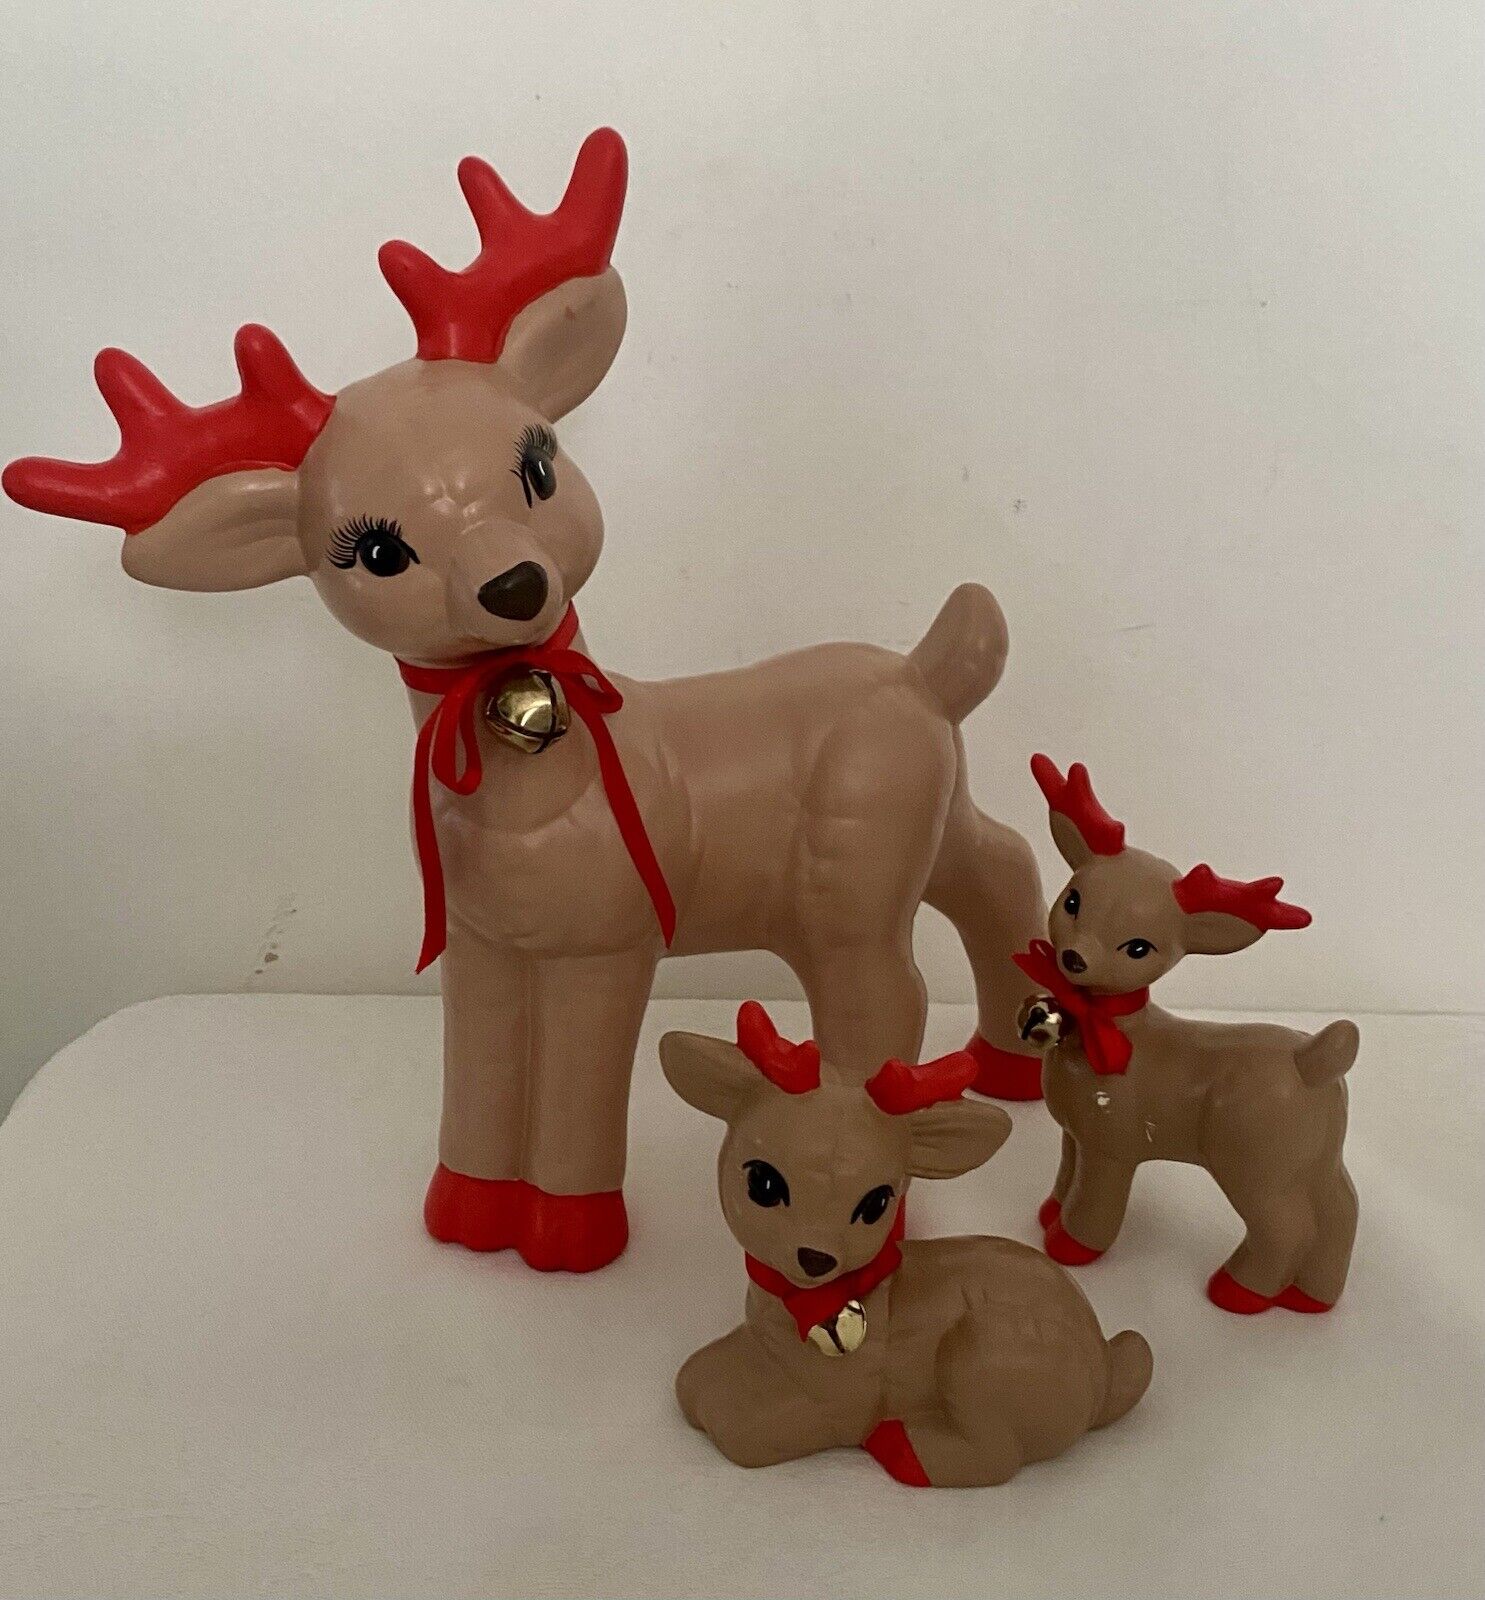 Kimple Mold Ceramic Christmas Reindeer Quilted Figurines Mama and Fawns 3 Piece